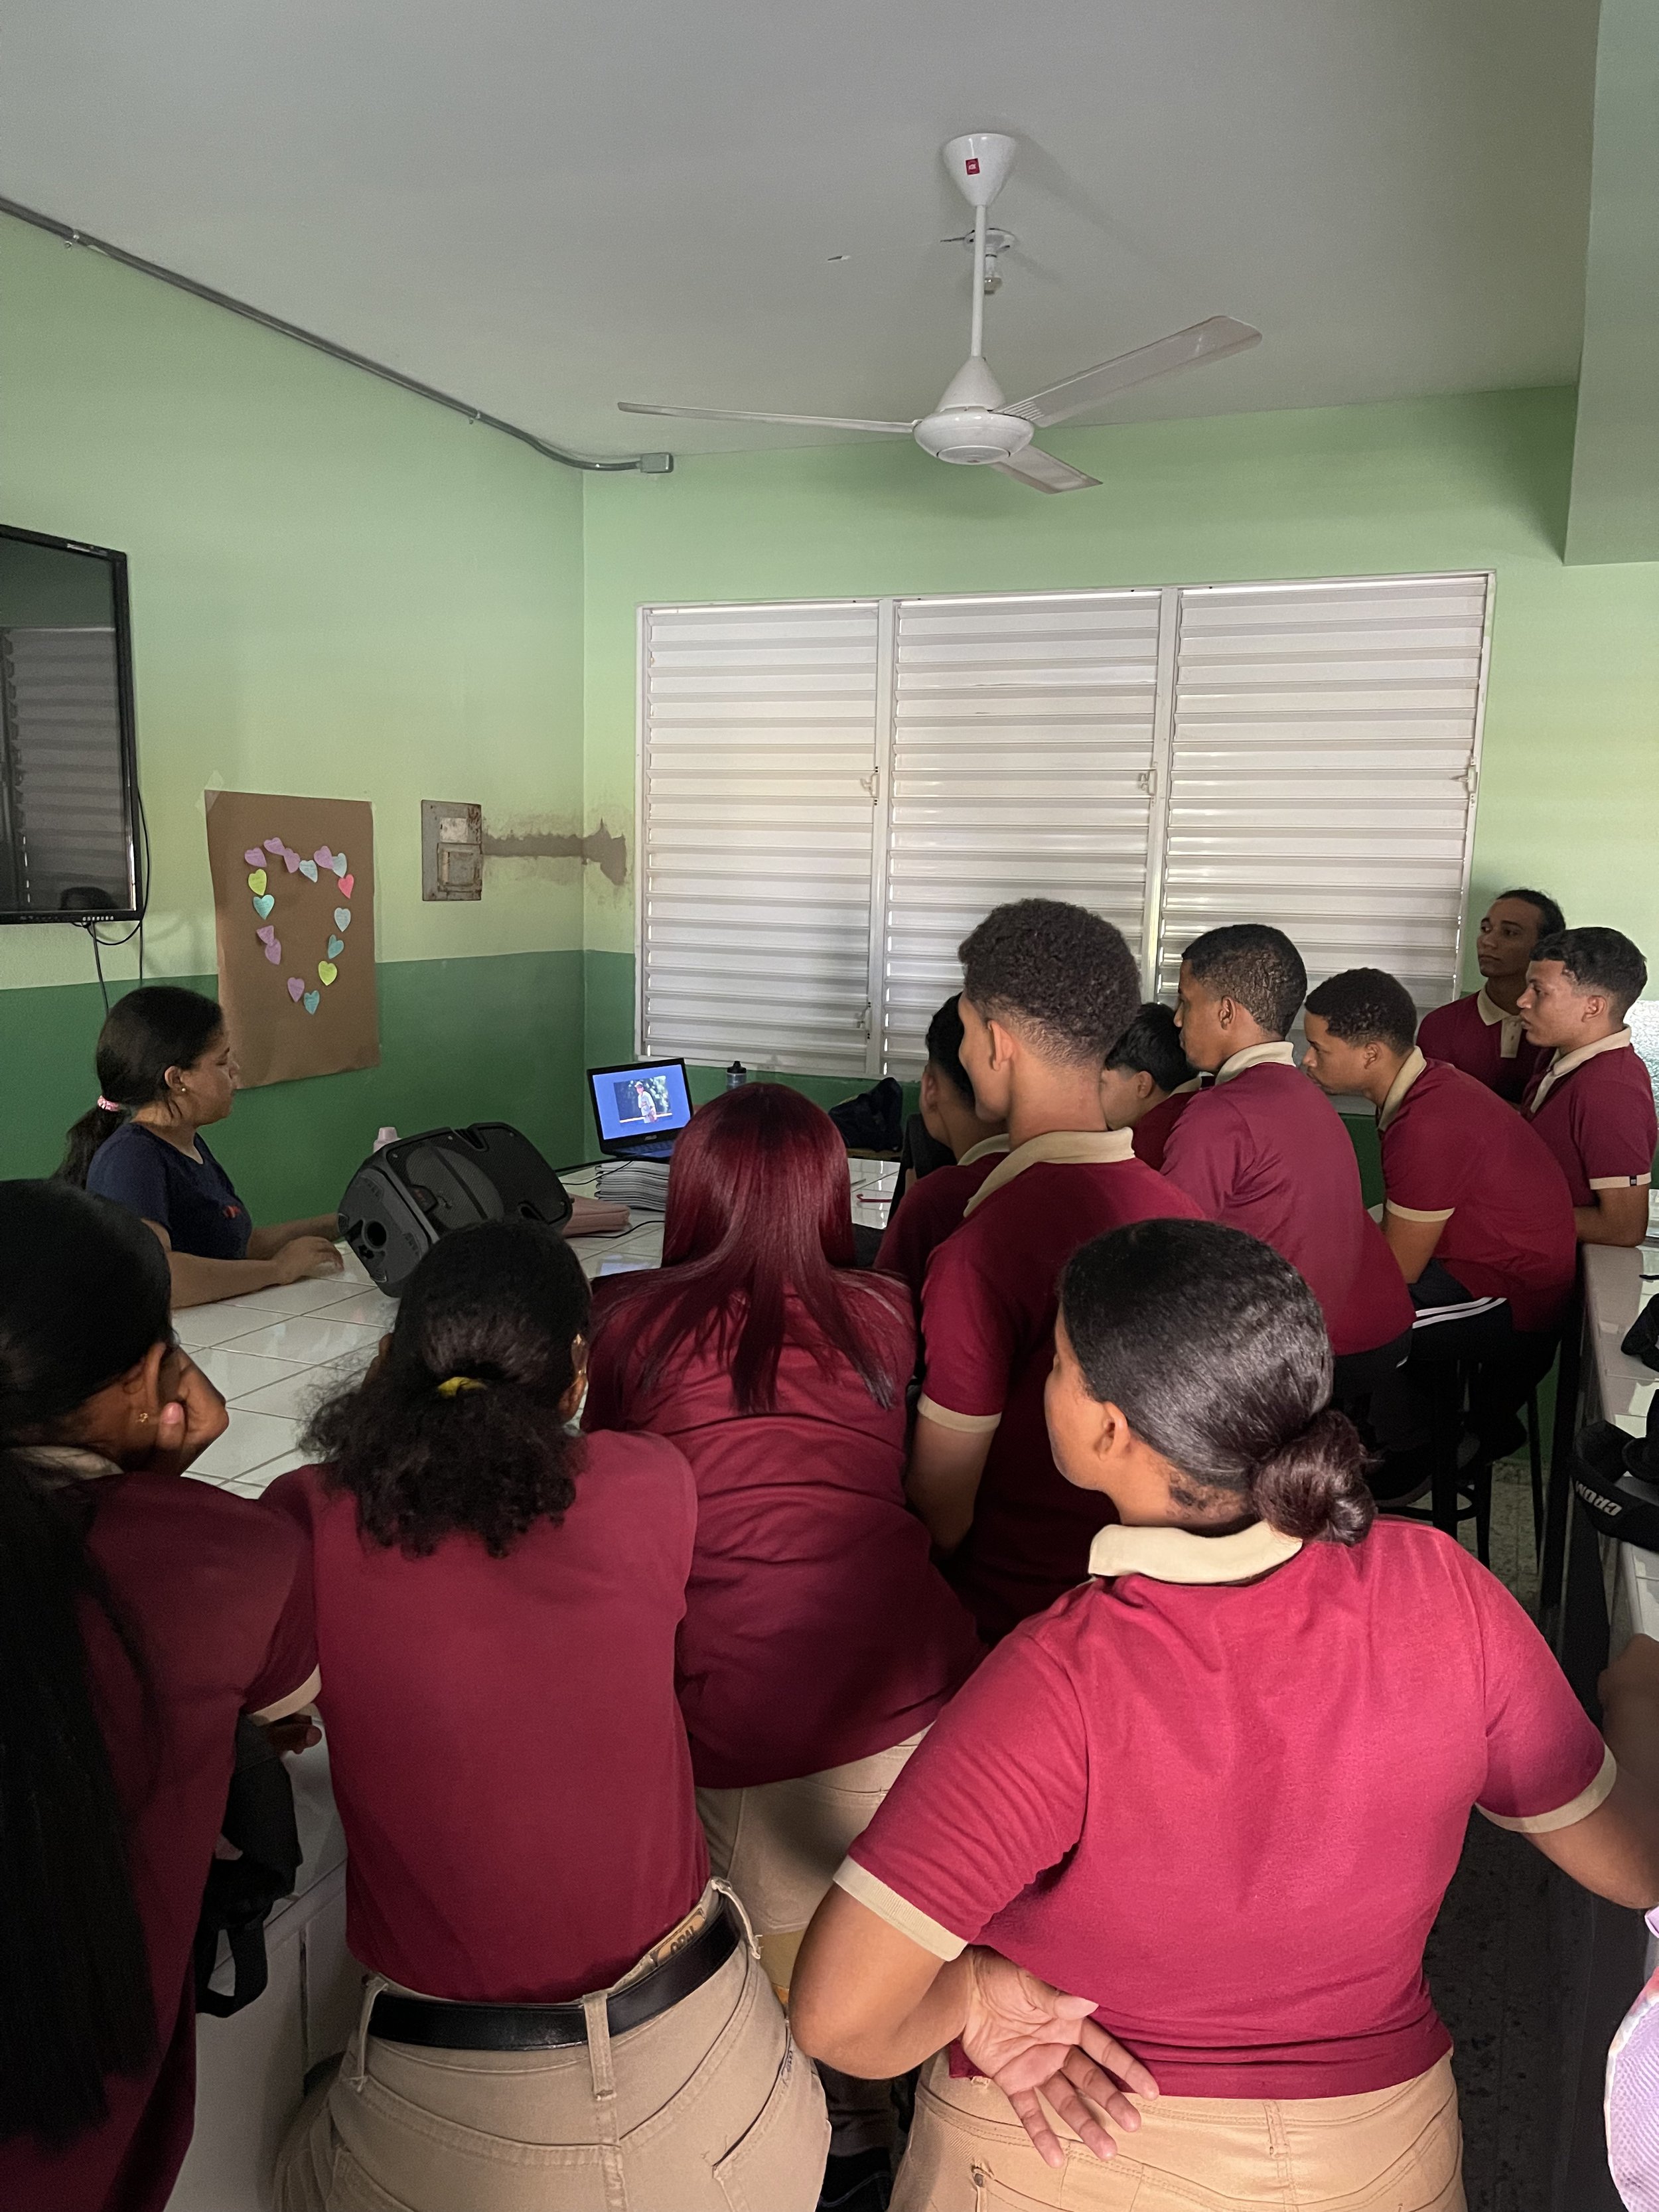 Crisbel, Thrive in Joy's Advisor in the DR, introduces Nagua students to C11